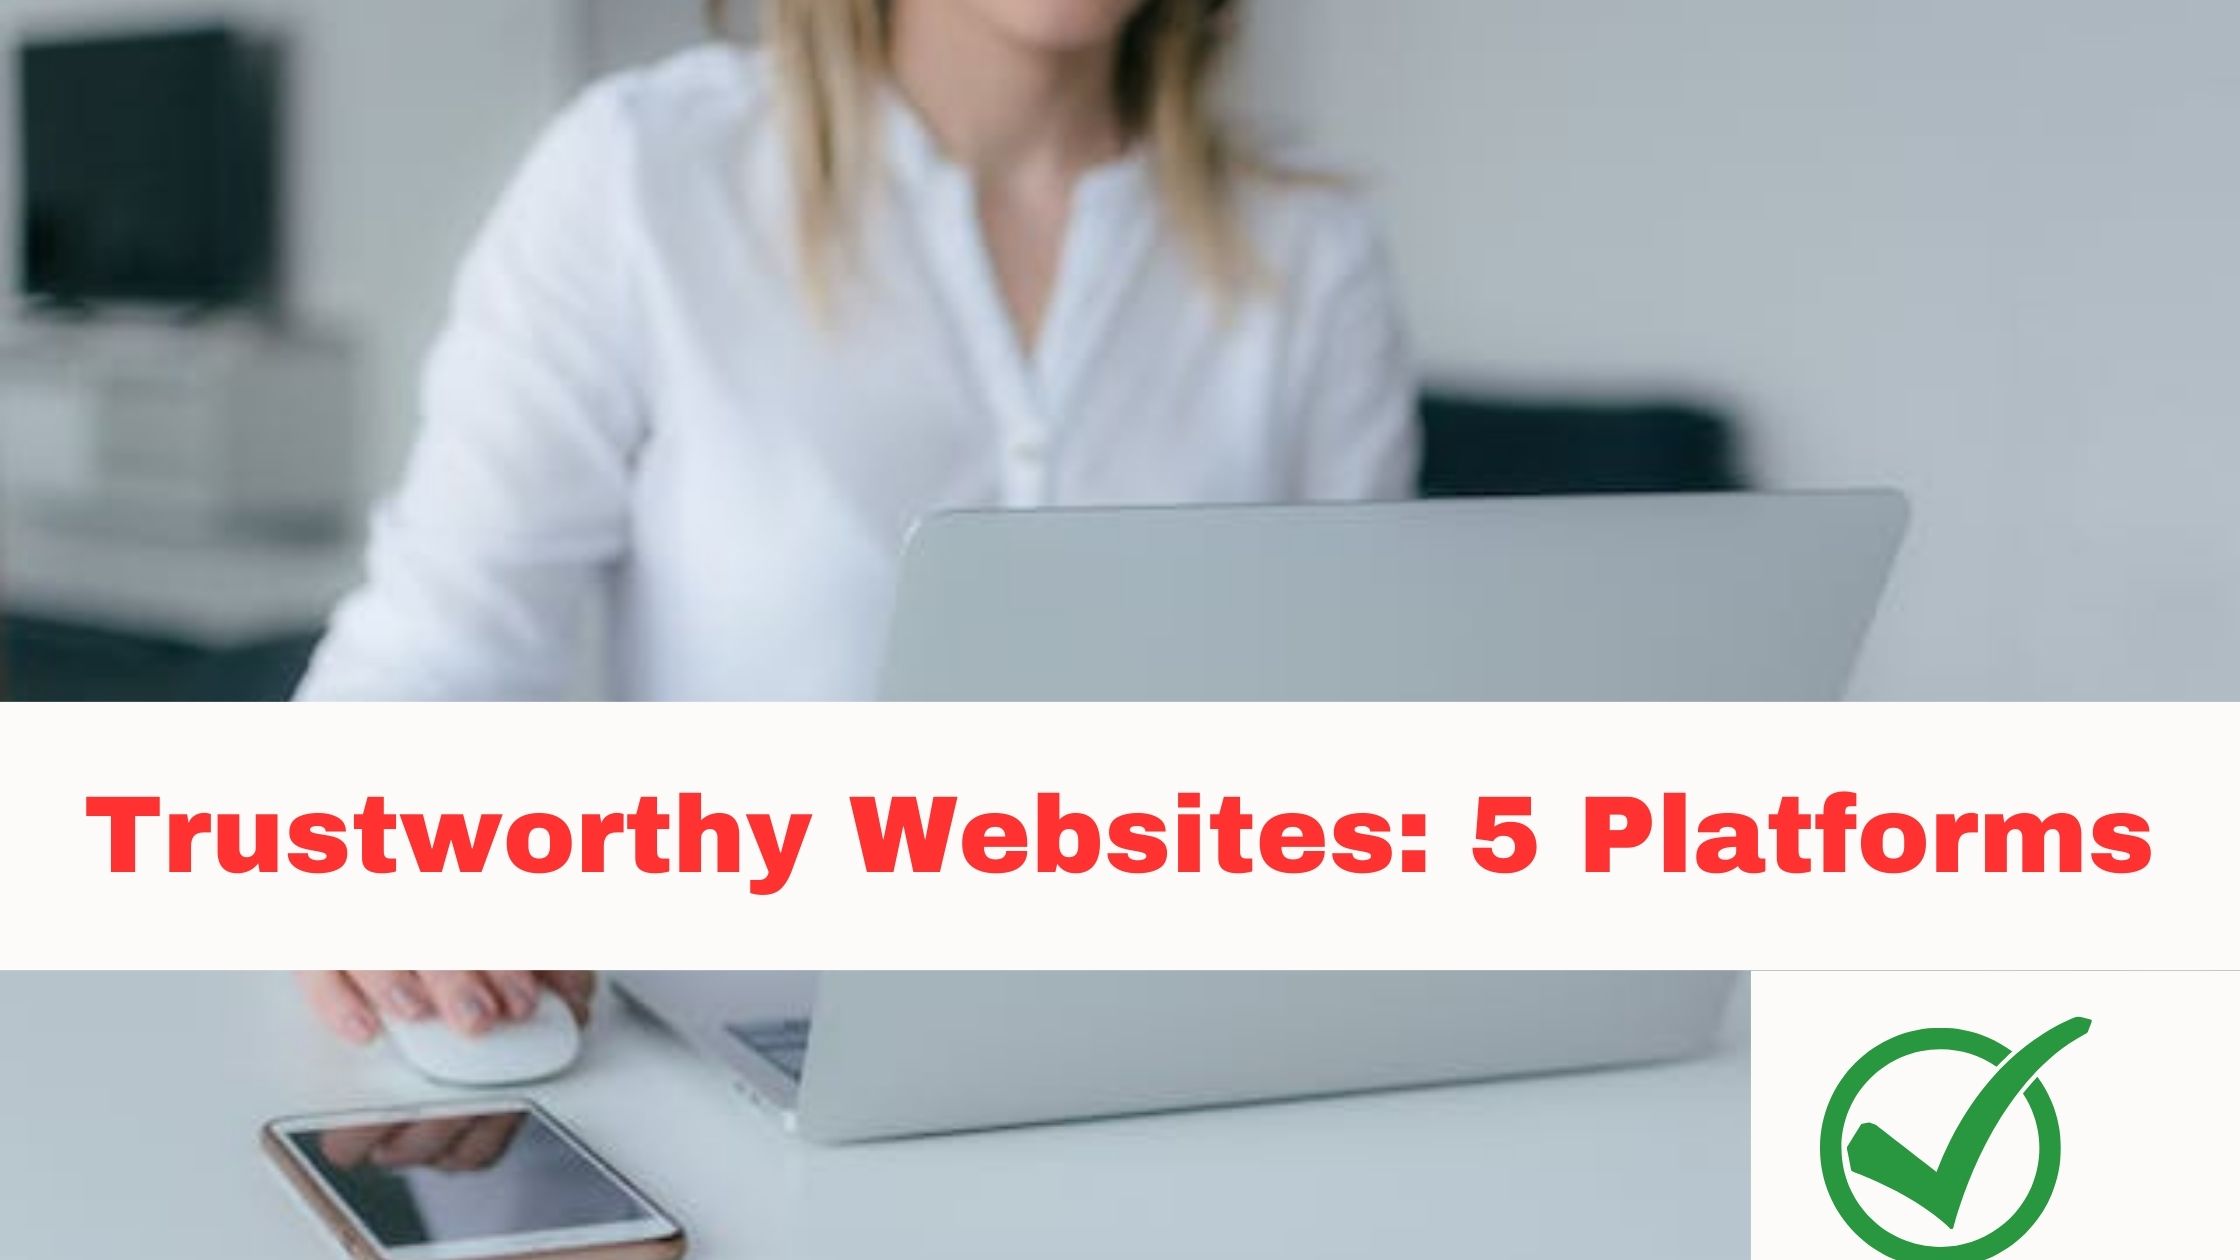 Five Platforms That Help You Know If A Website Is Safe And Trustworthy